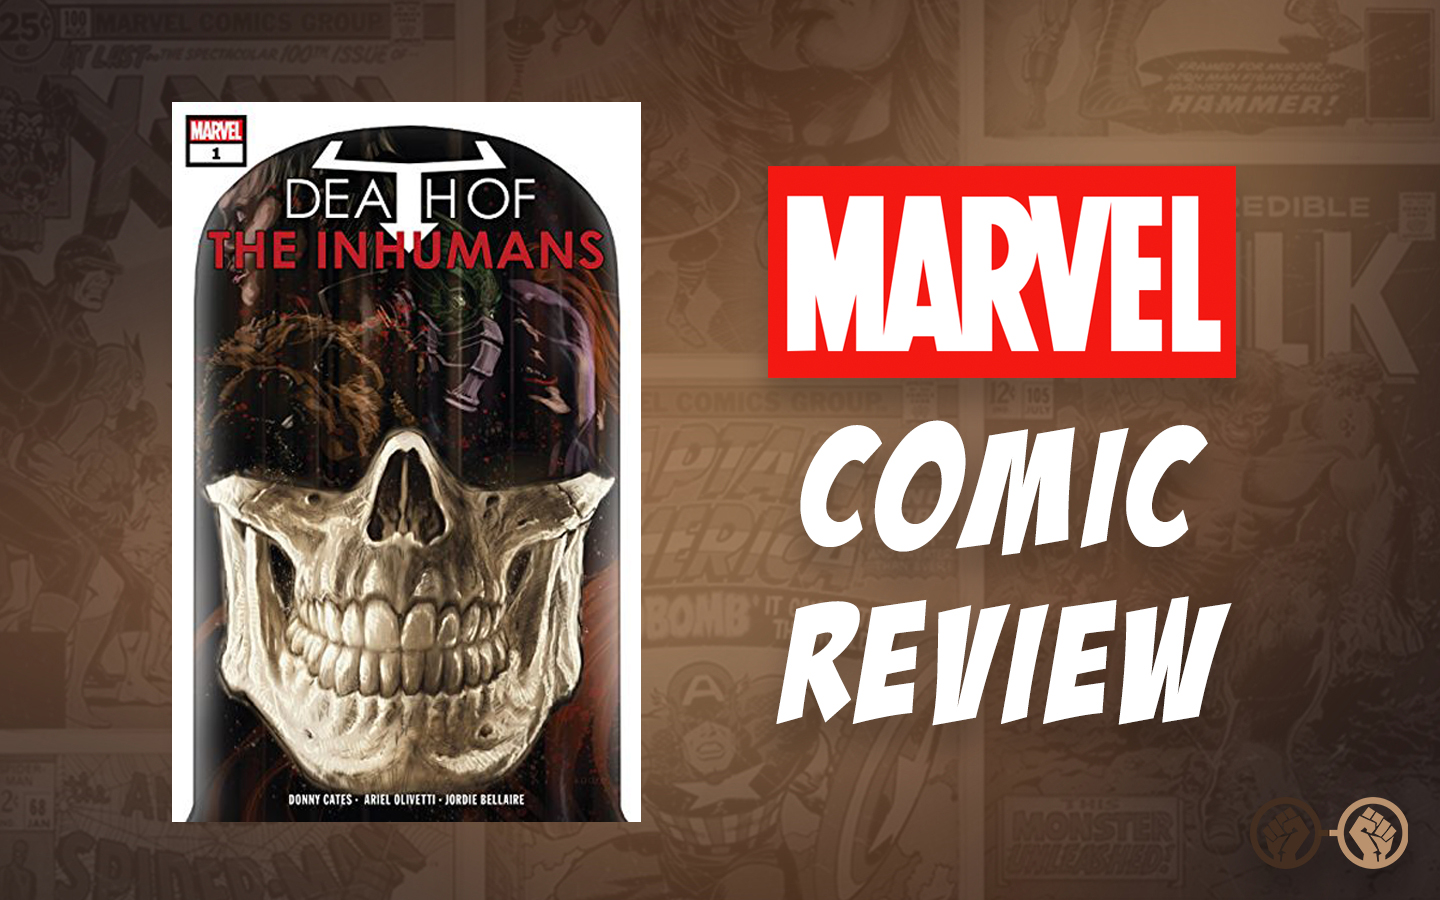 GOC Comic Review: Death of the Inhumans #1